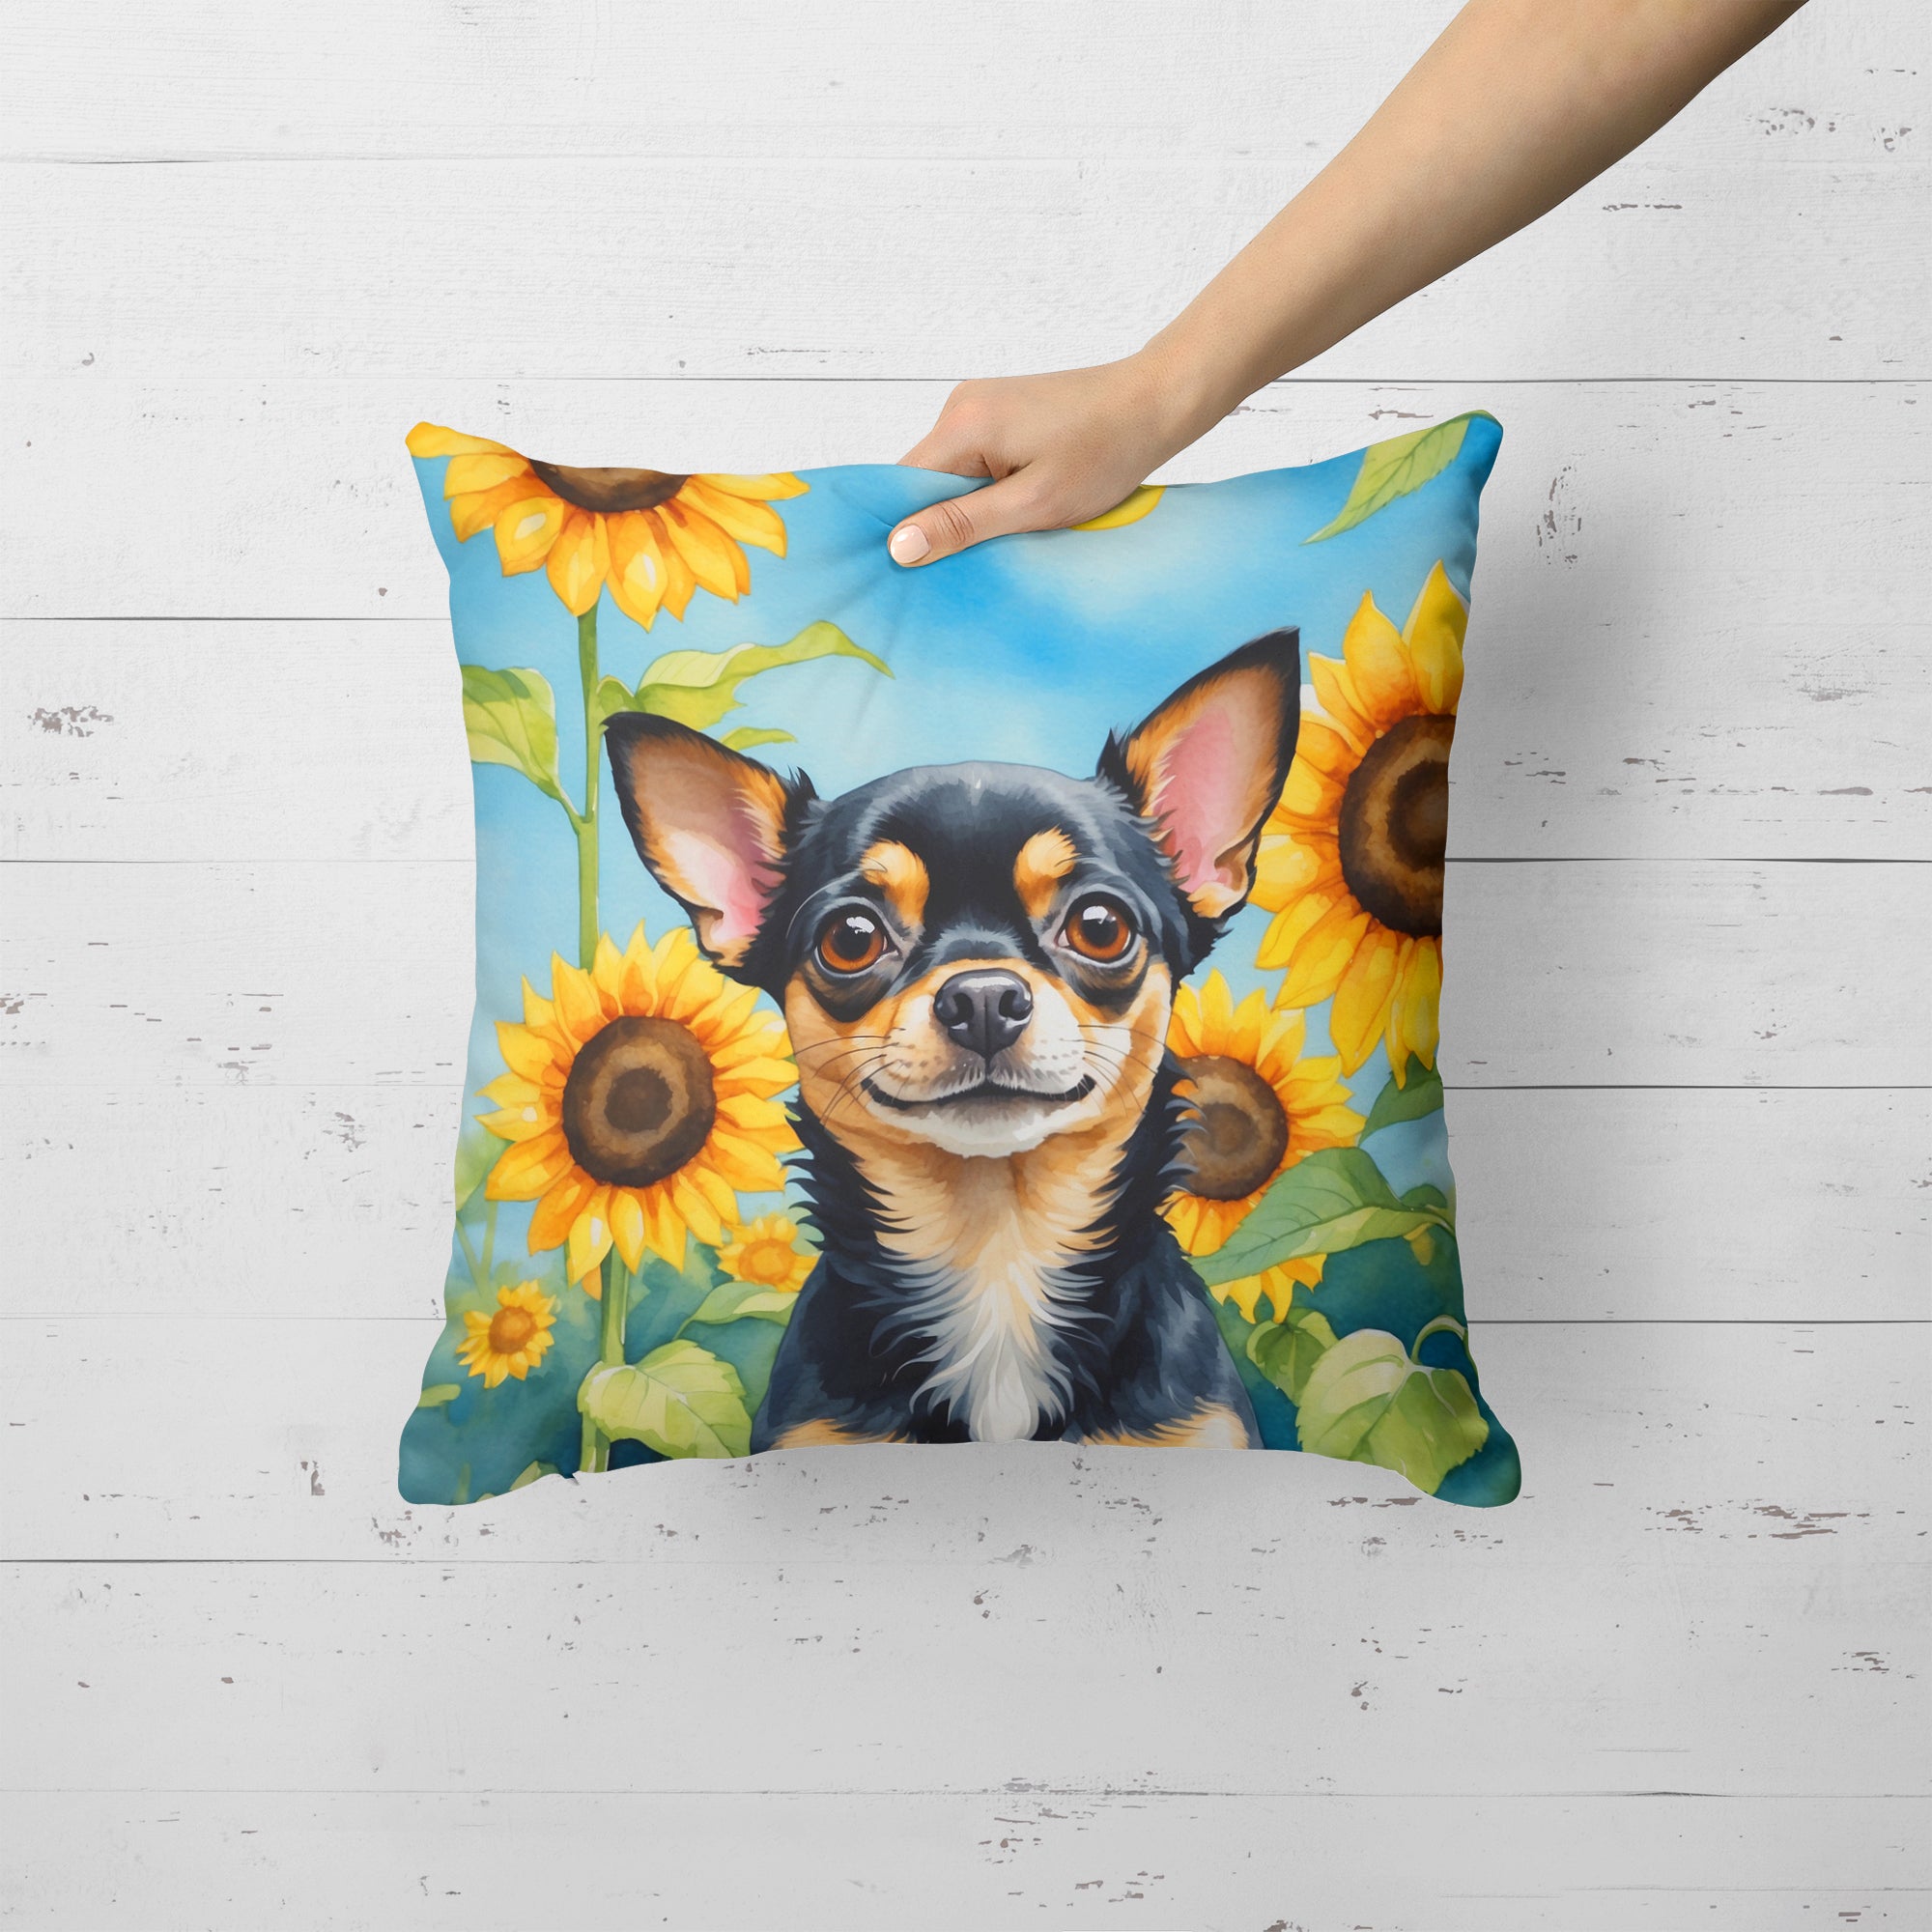 Buy this Chihuahua in Sunflowers Throw Pillow